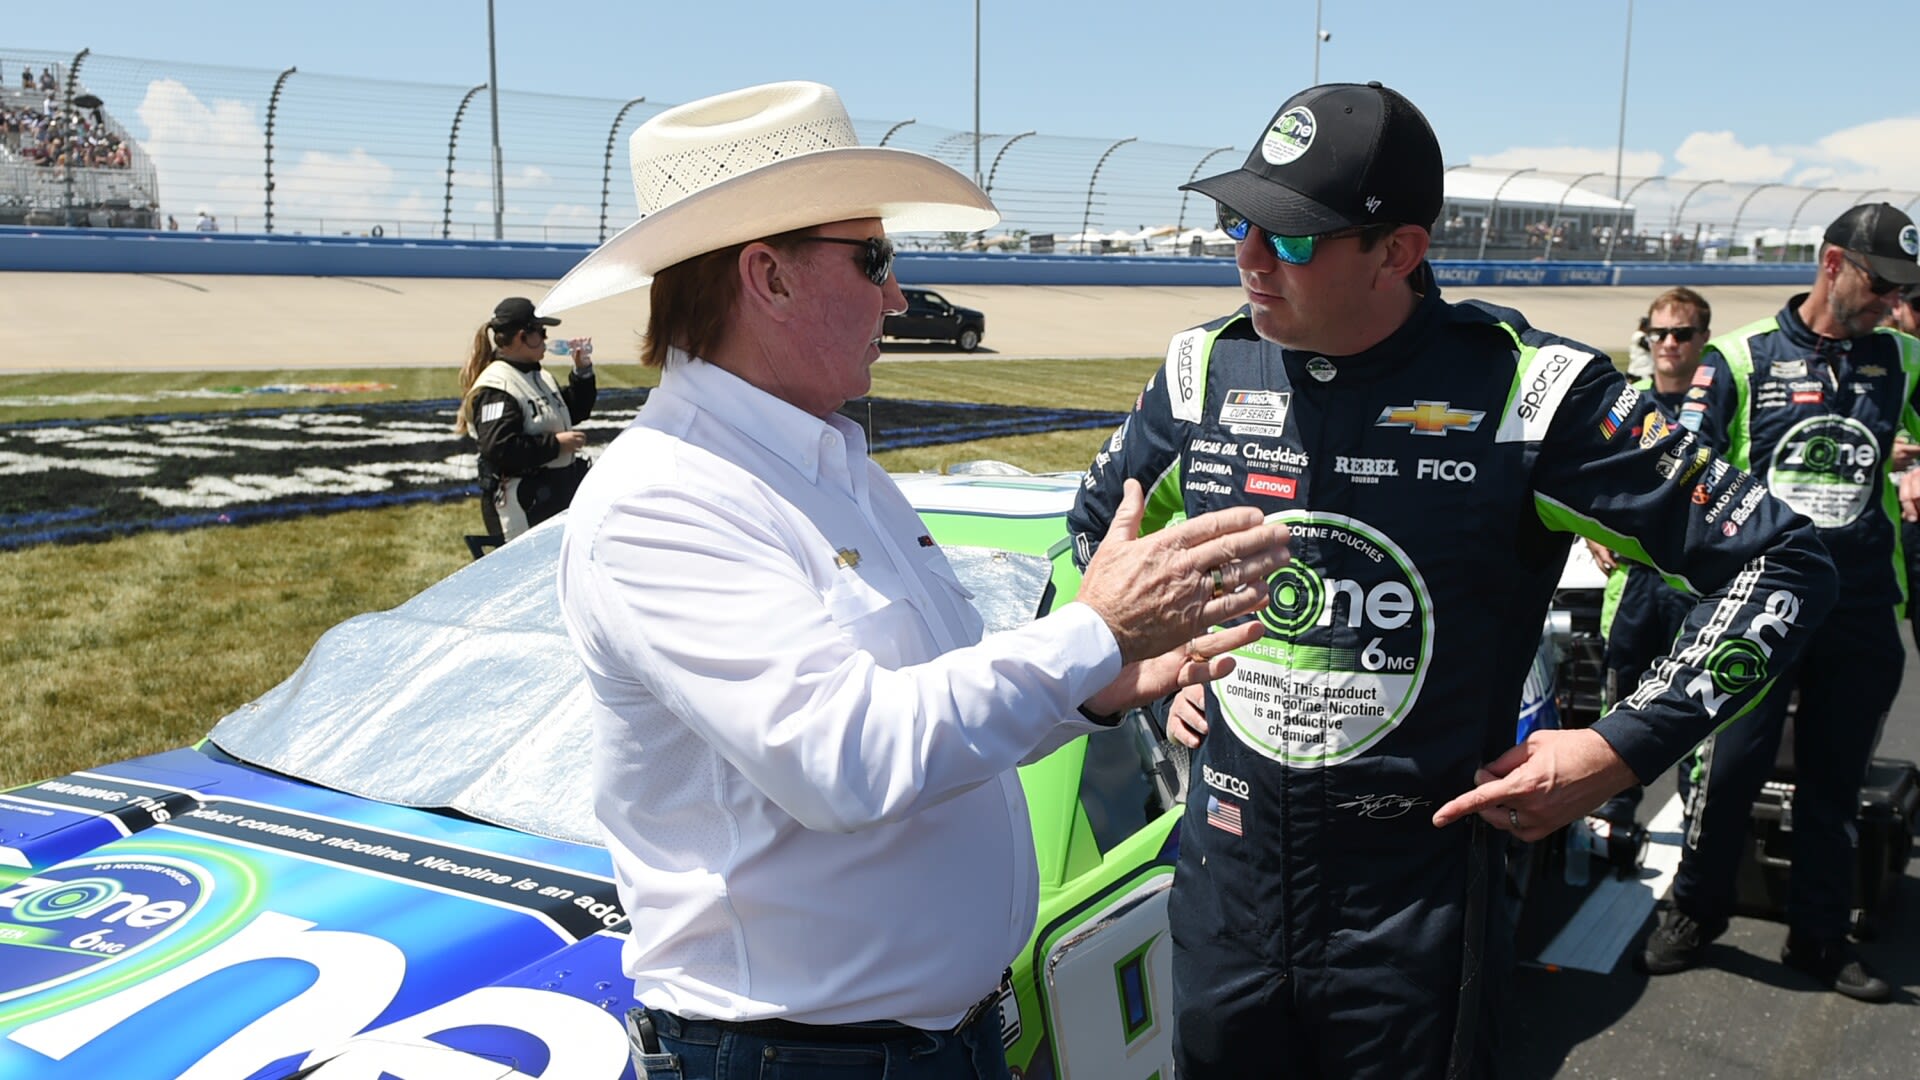 Richard Childress says he is 'more involved' in RCR as team seeks turnaround